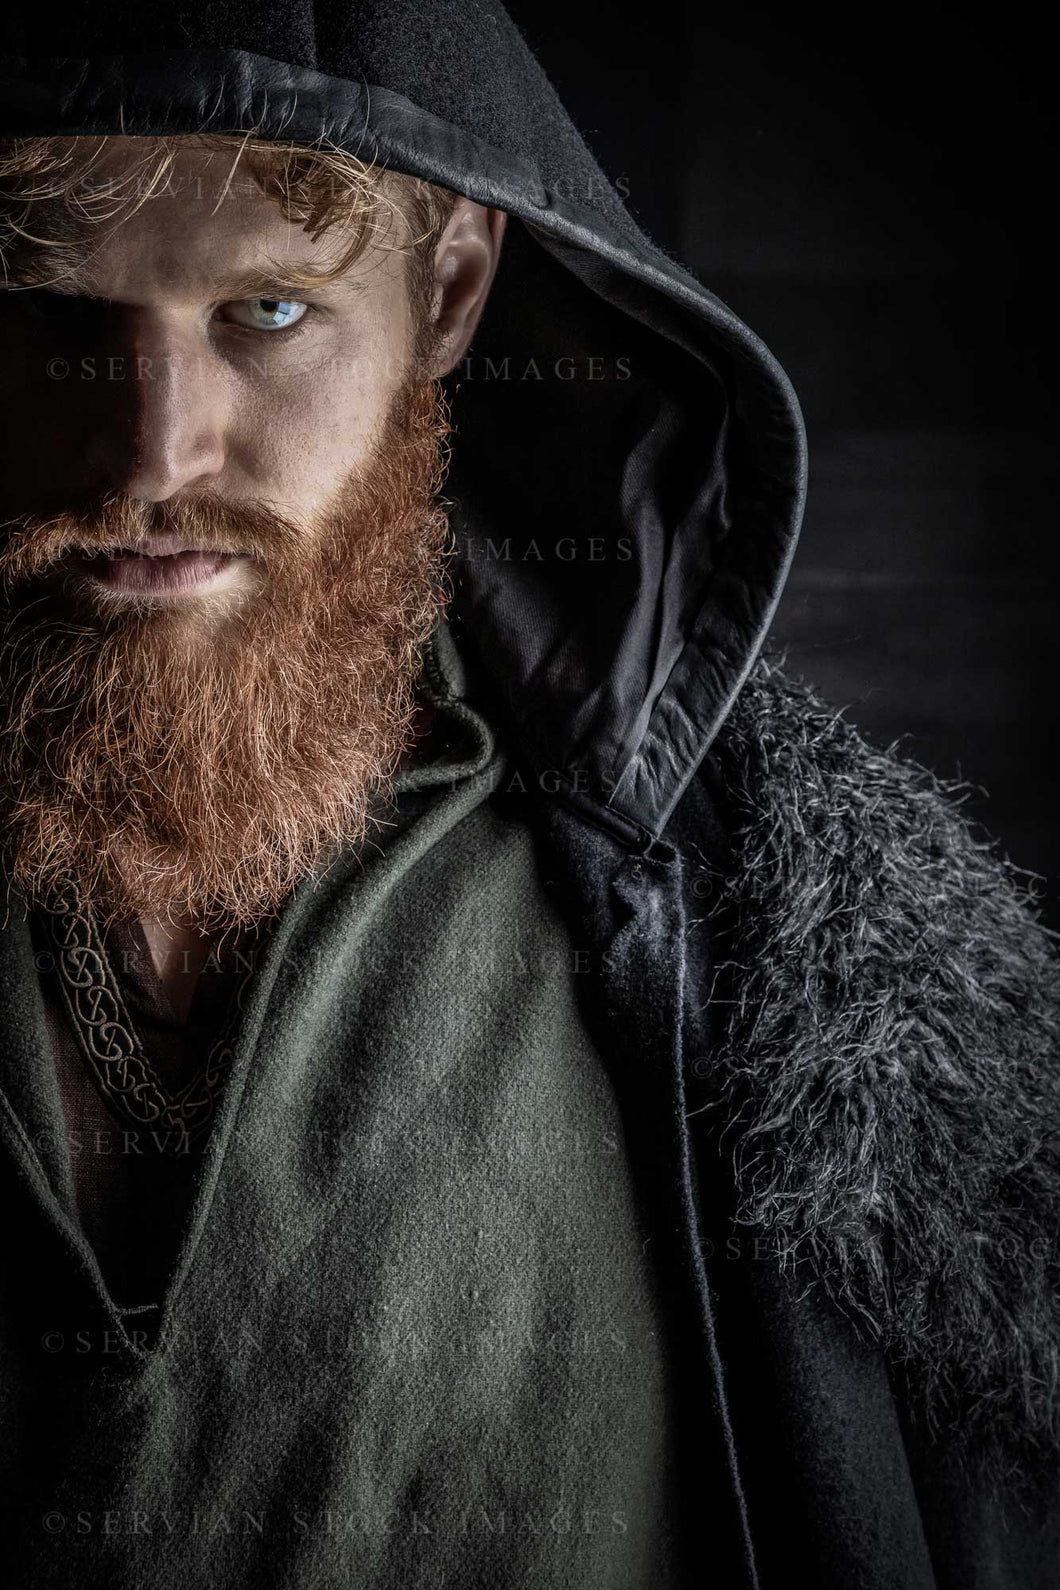 Viking or high fantasy man with red hair and beard wearing a black cloak against a black backdrop (Luke 3194-2)